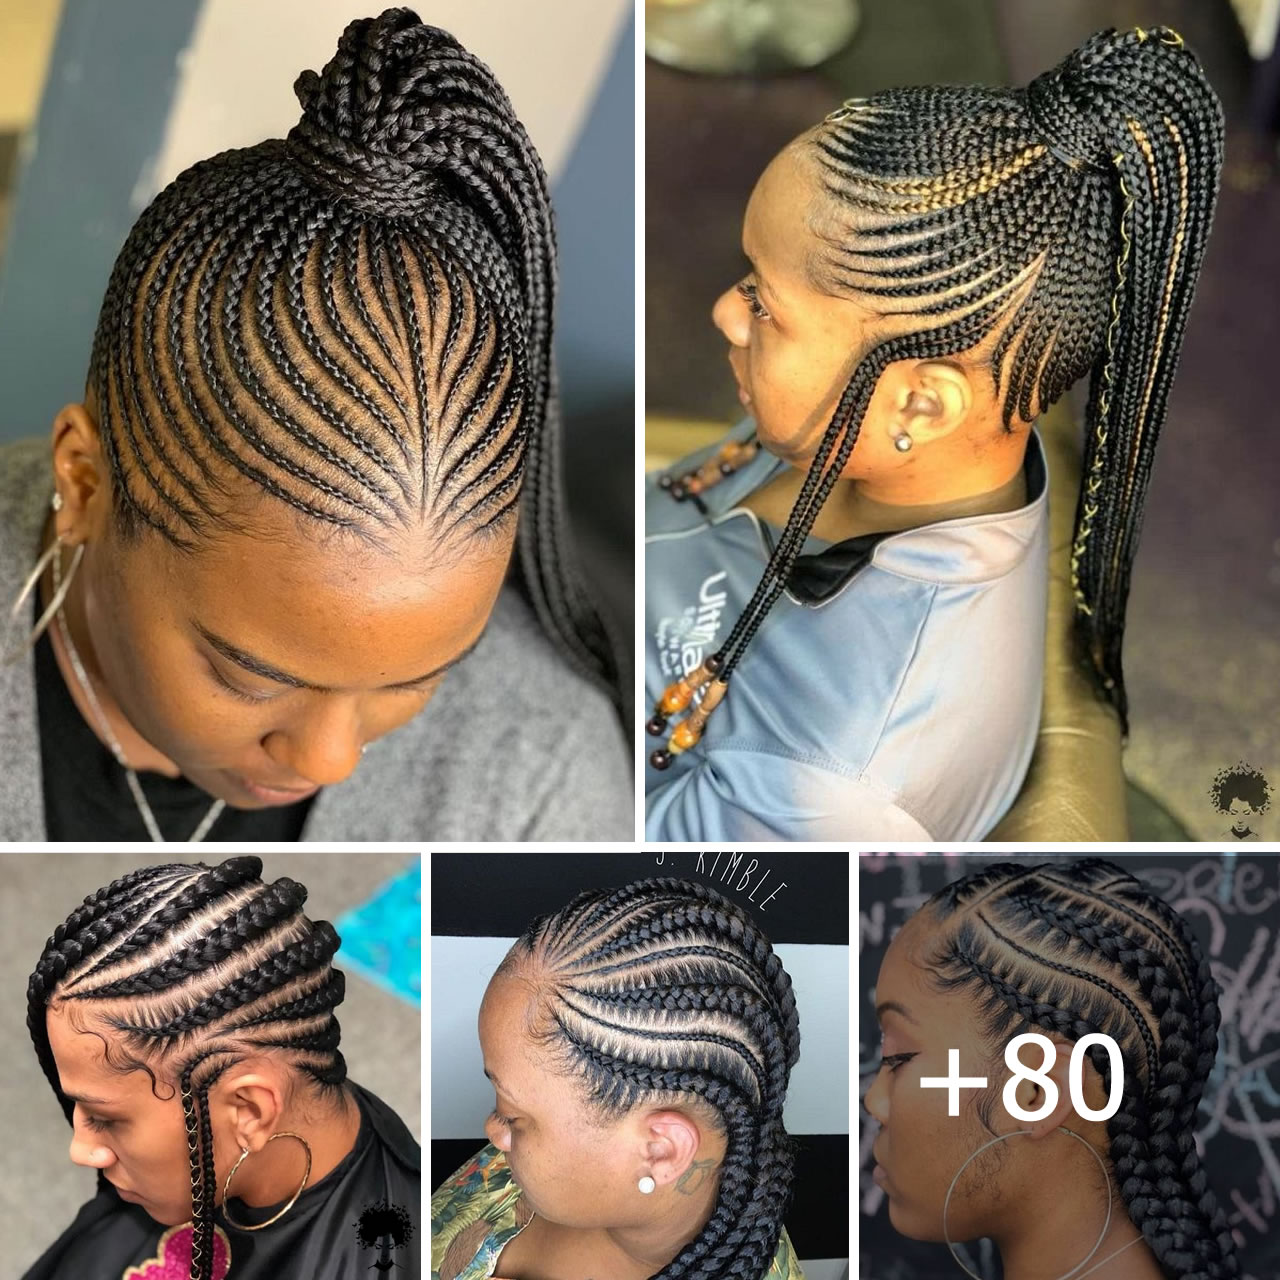 80 Braided Hairstyles You Need to Try Next